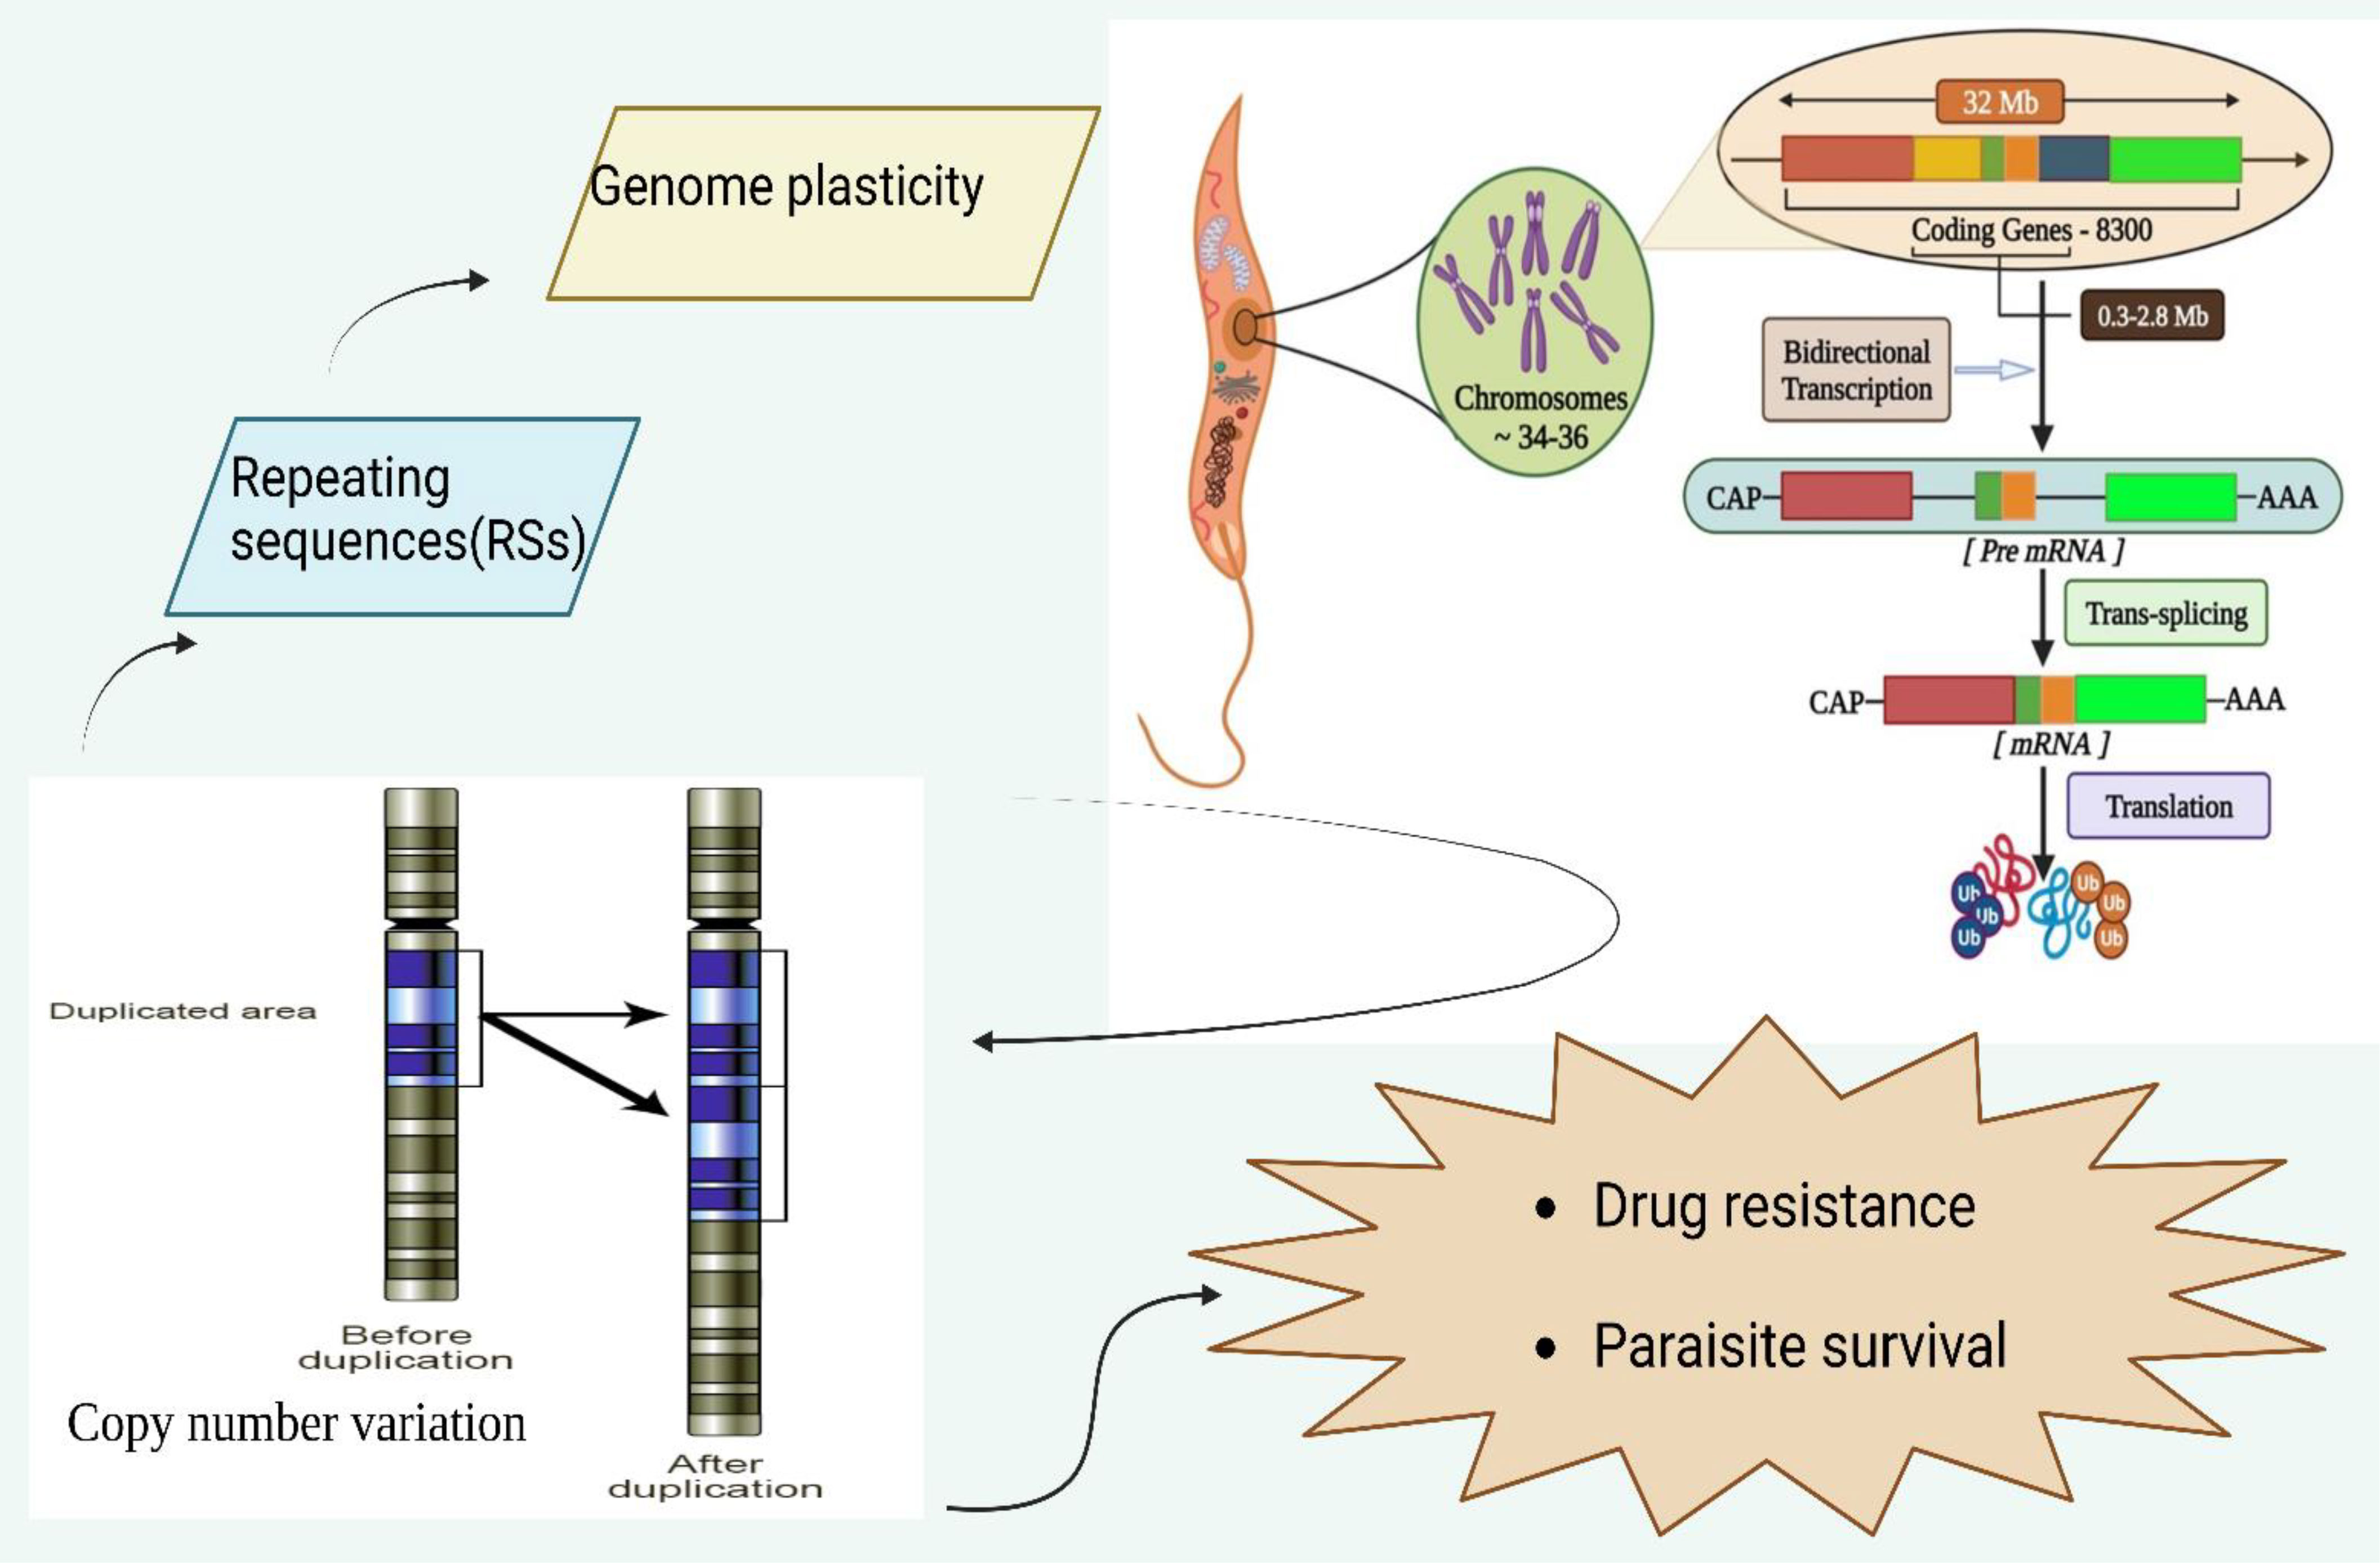 Frontiers  The paradigm of intracellular parasite survival and drug  resistance in leishmanial parasite through genome plasticity and  epigenetics: Perception and future perspective